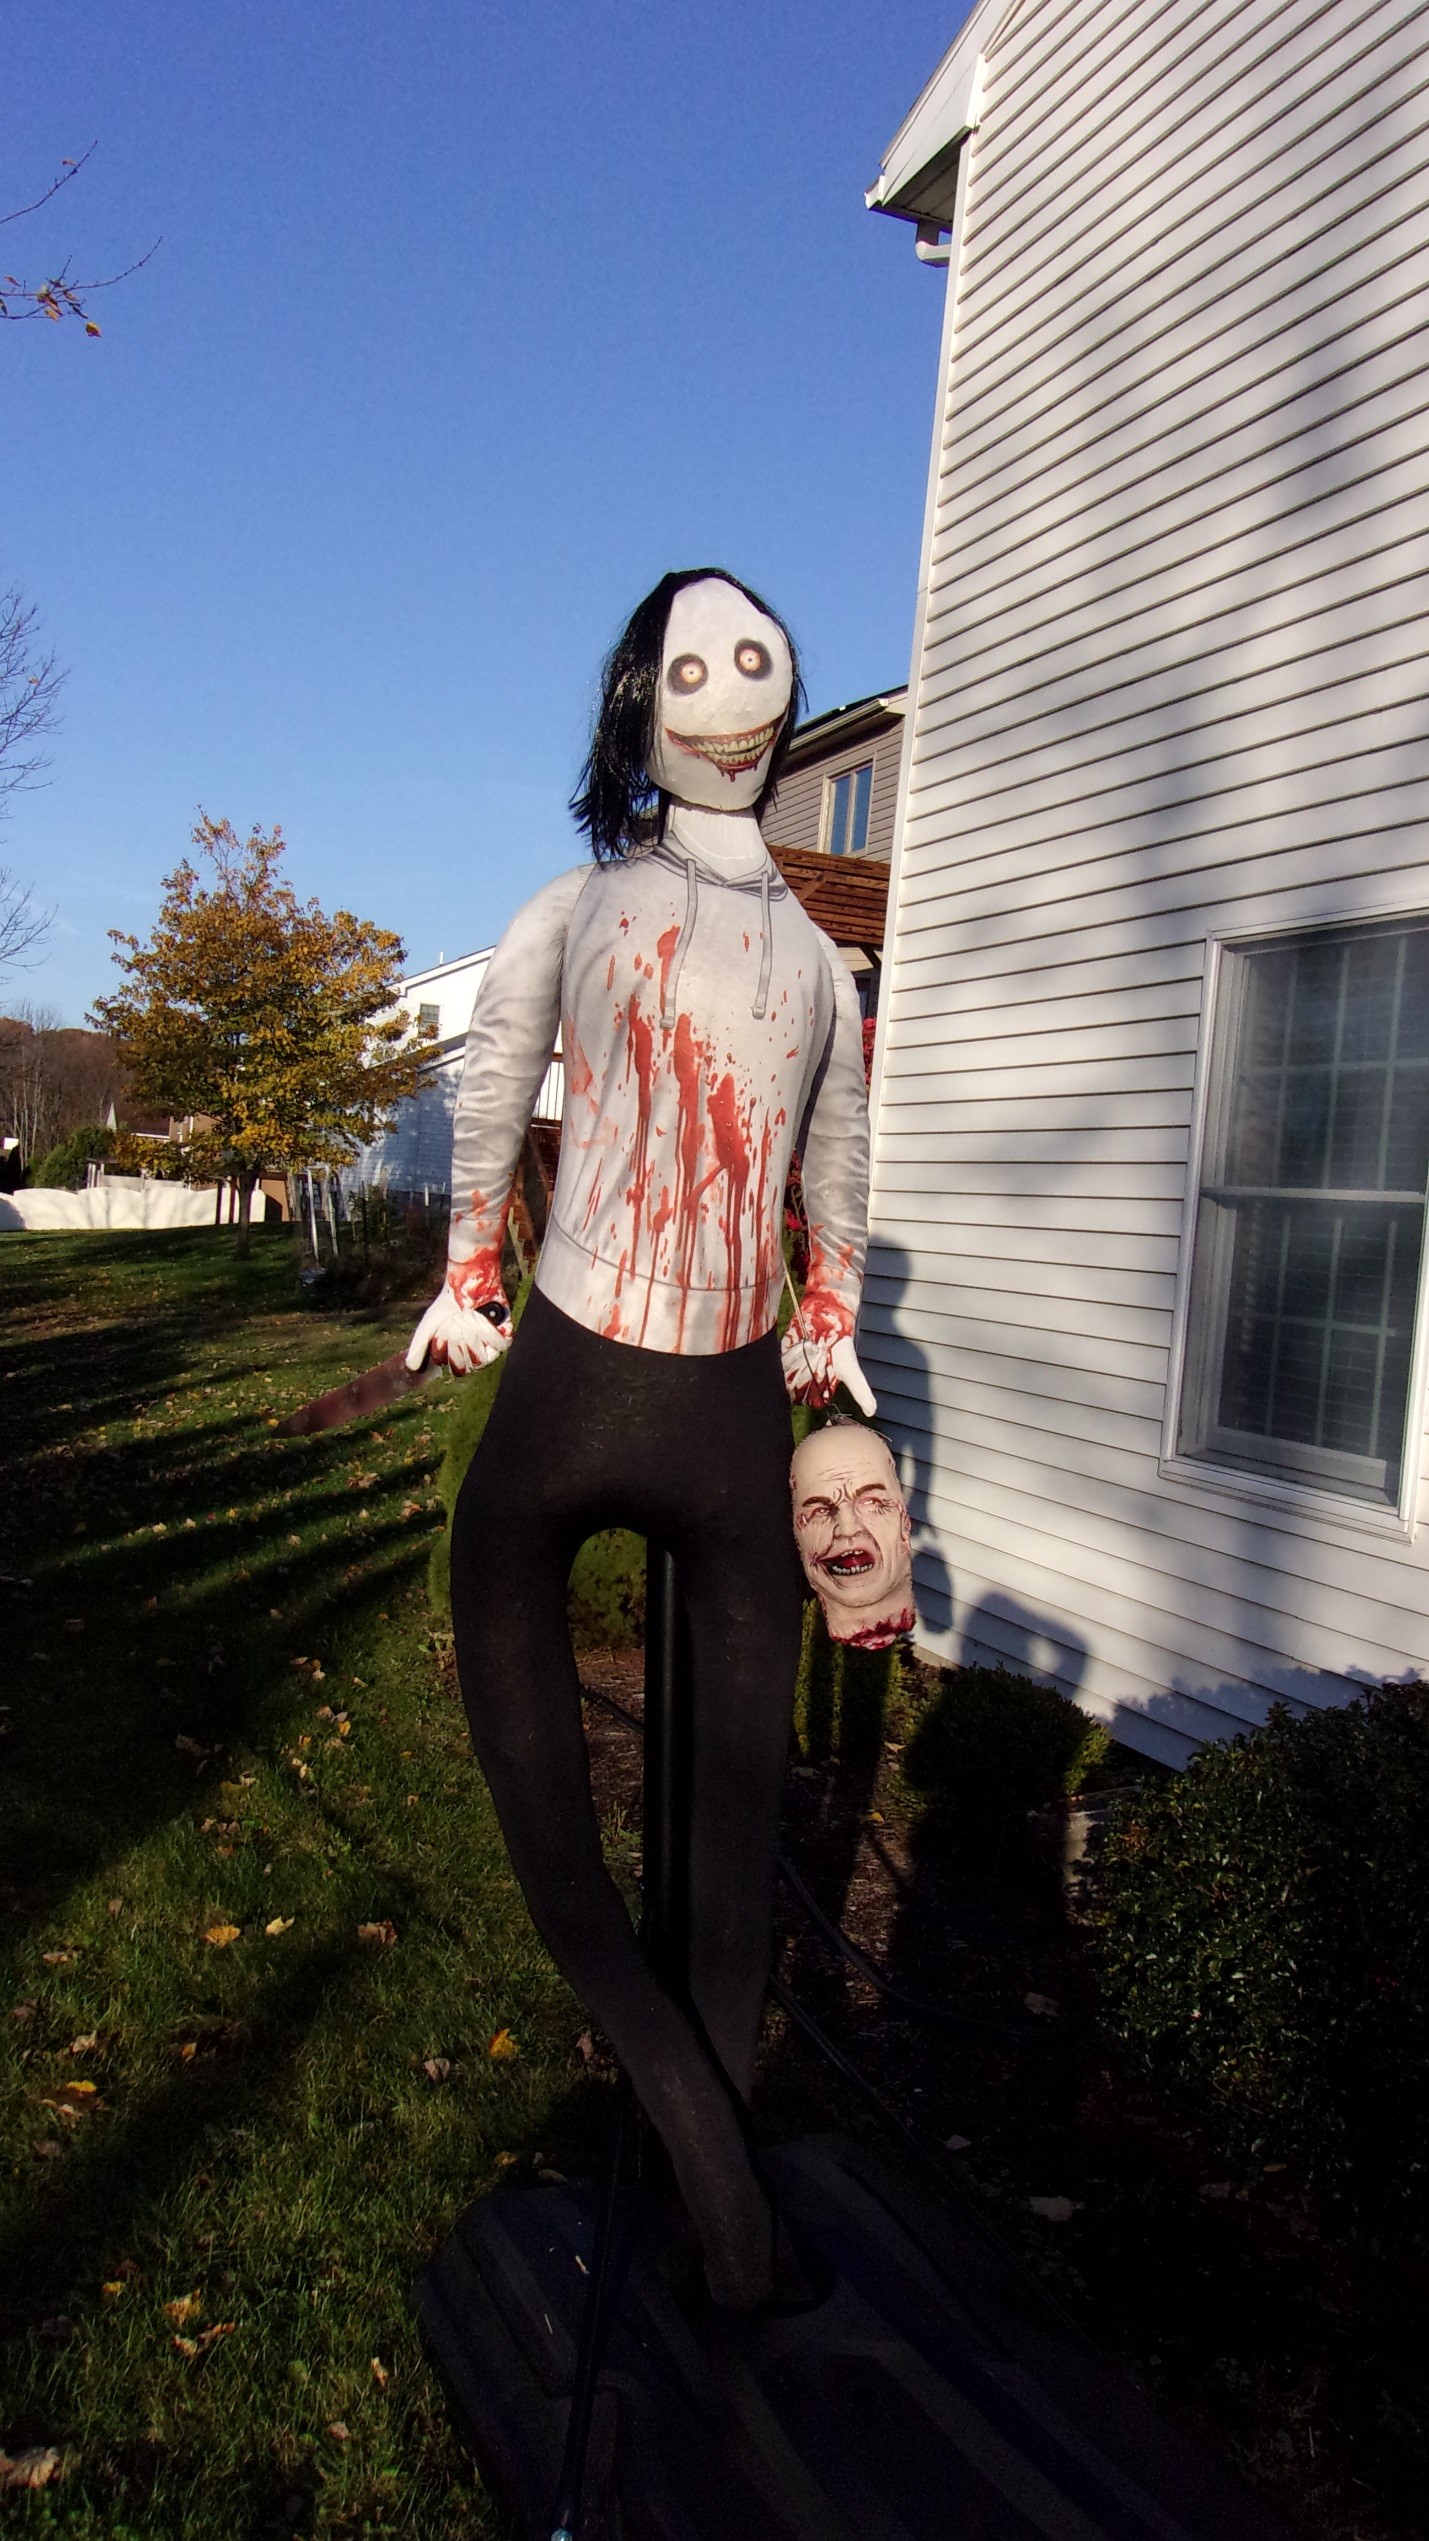 Sweet Briar's scary scarecrow with fake dismembered head